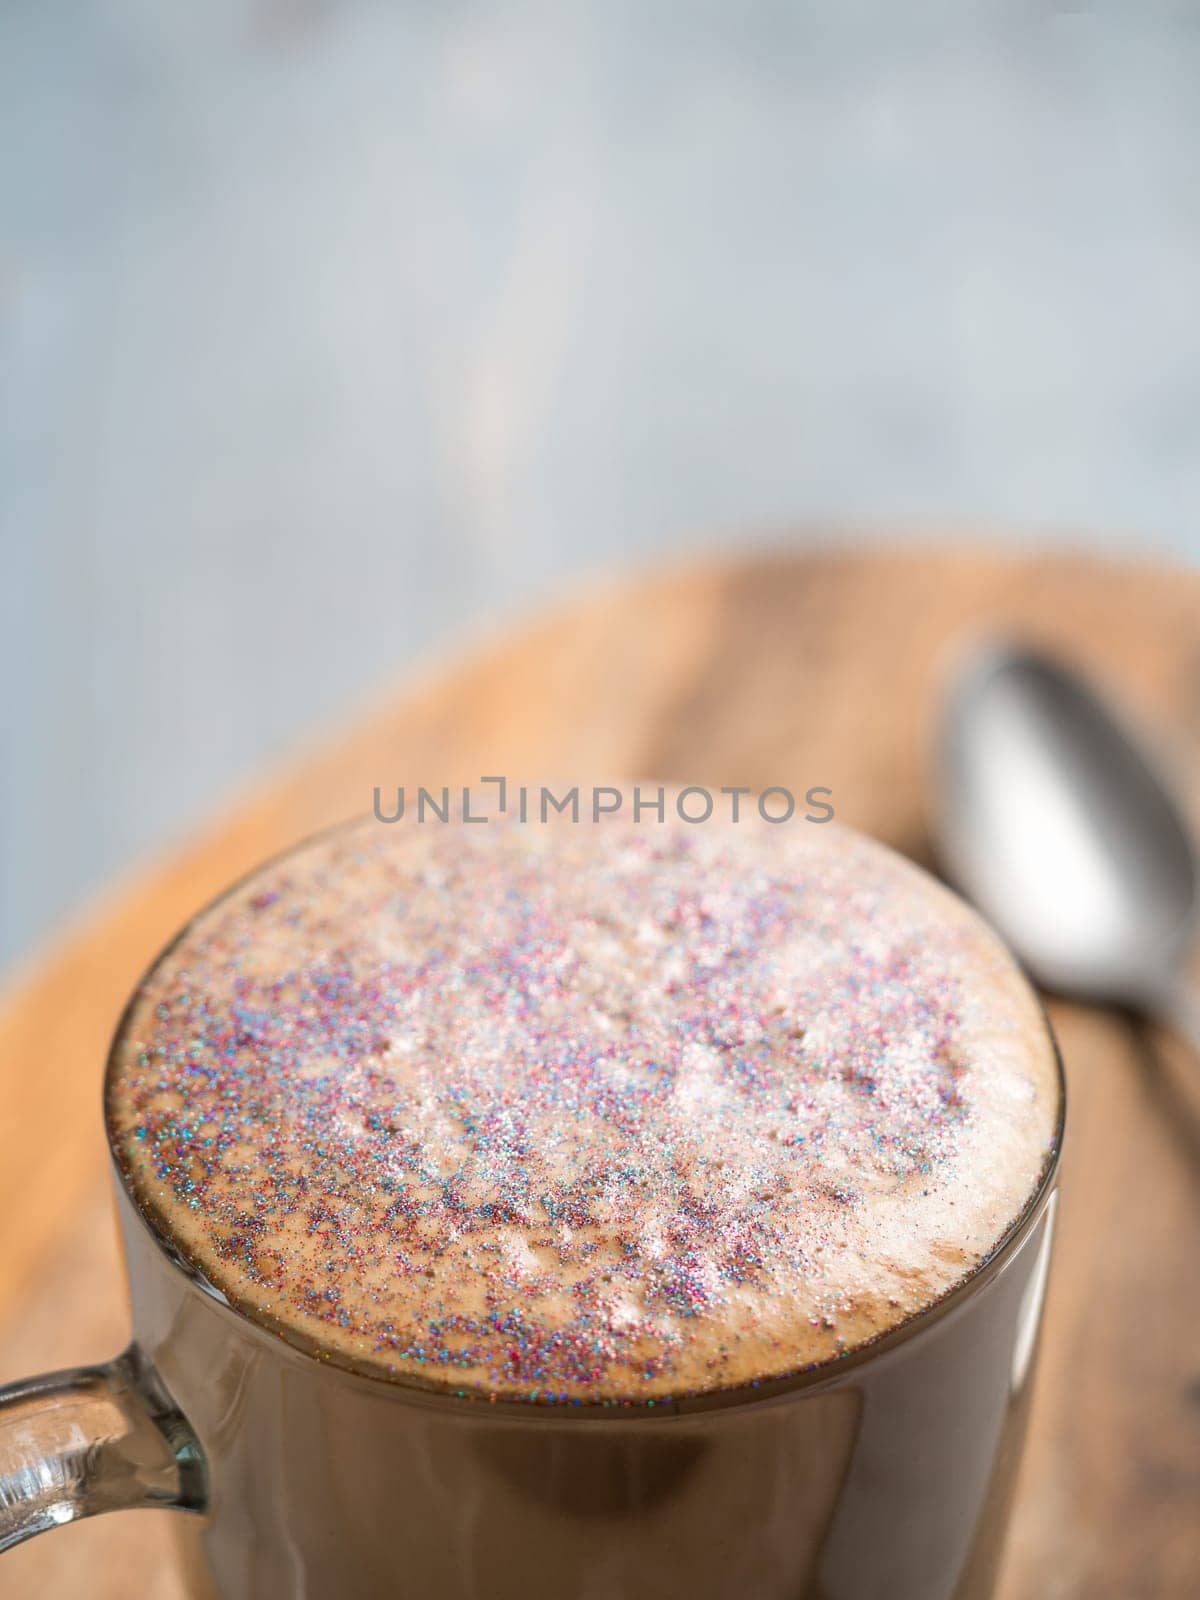 Trendy Coffee with edible glitter. Cup of sparkly coffee or diamond cappuccino on gray table. Copy space for text